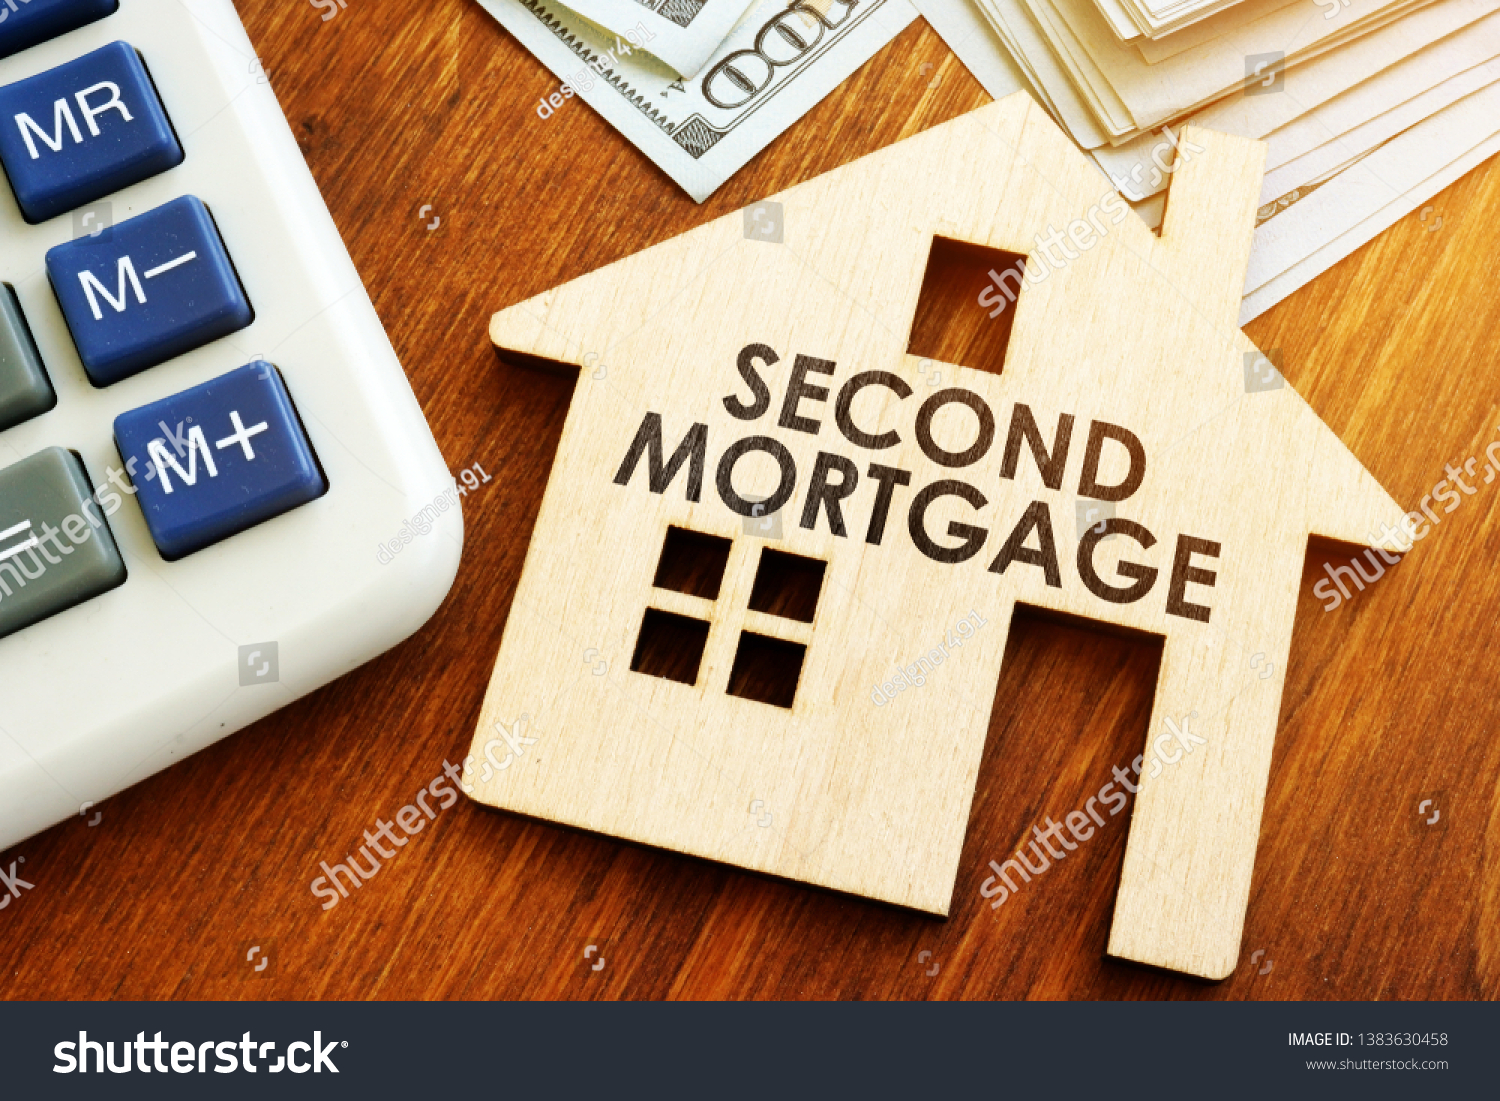 Second Mortgage written on wooden home. #1383630458